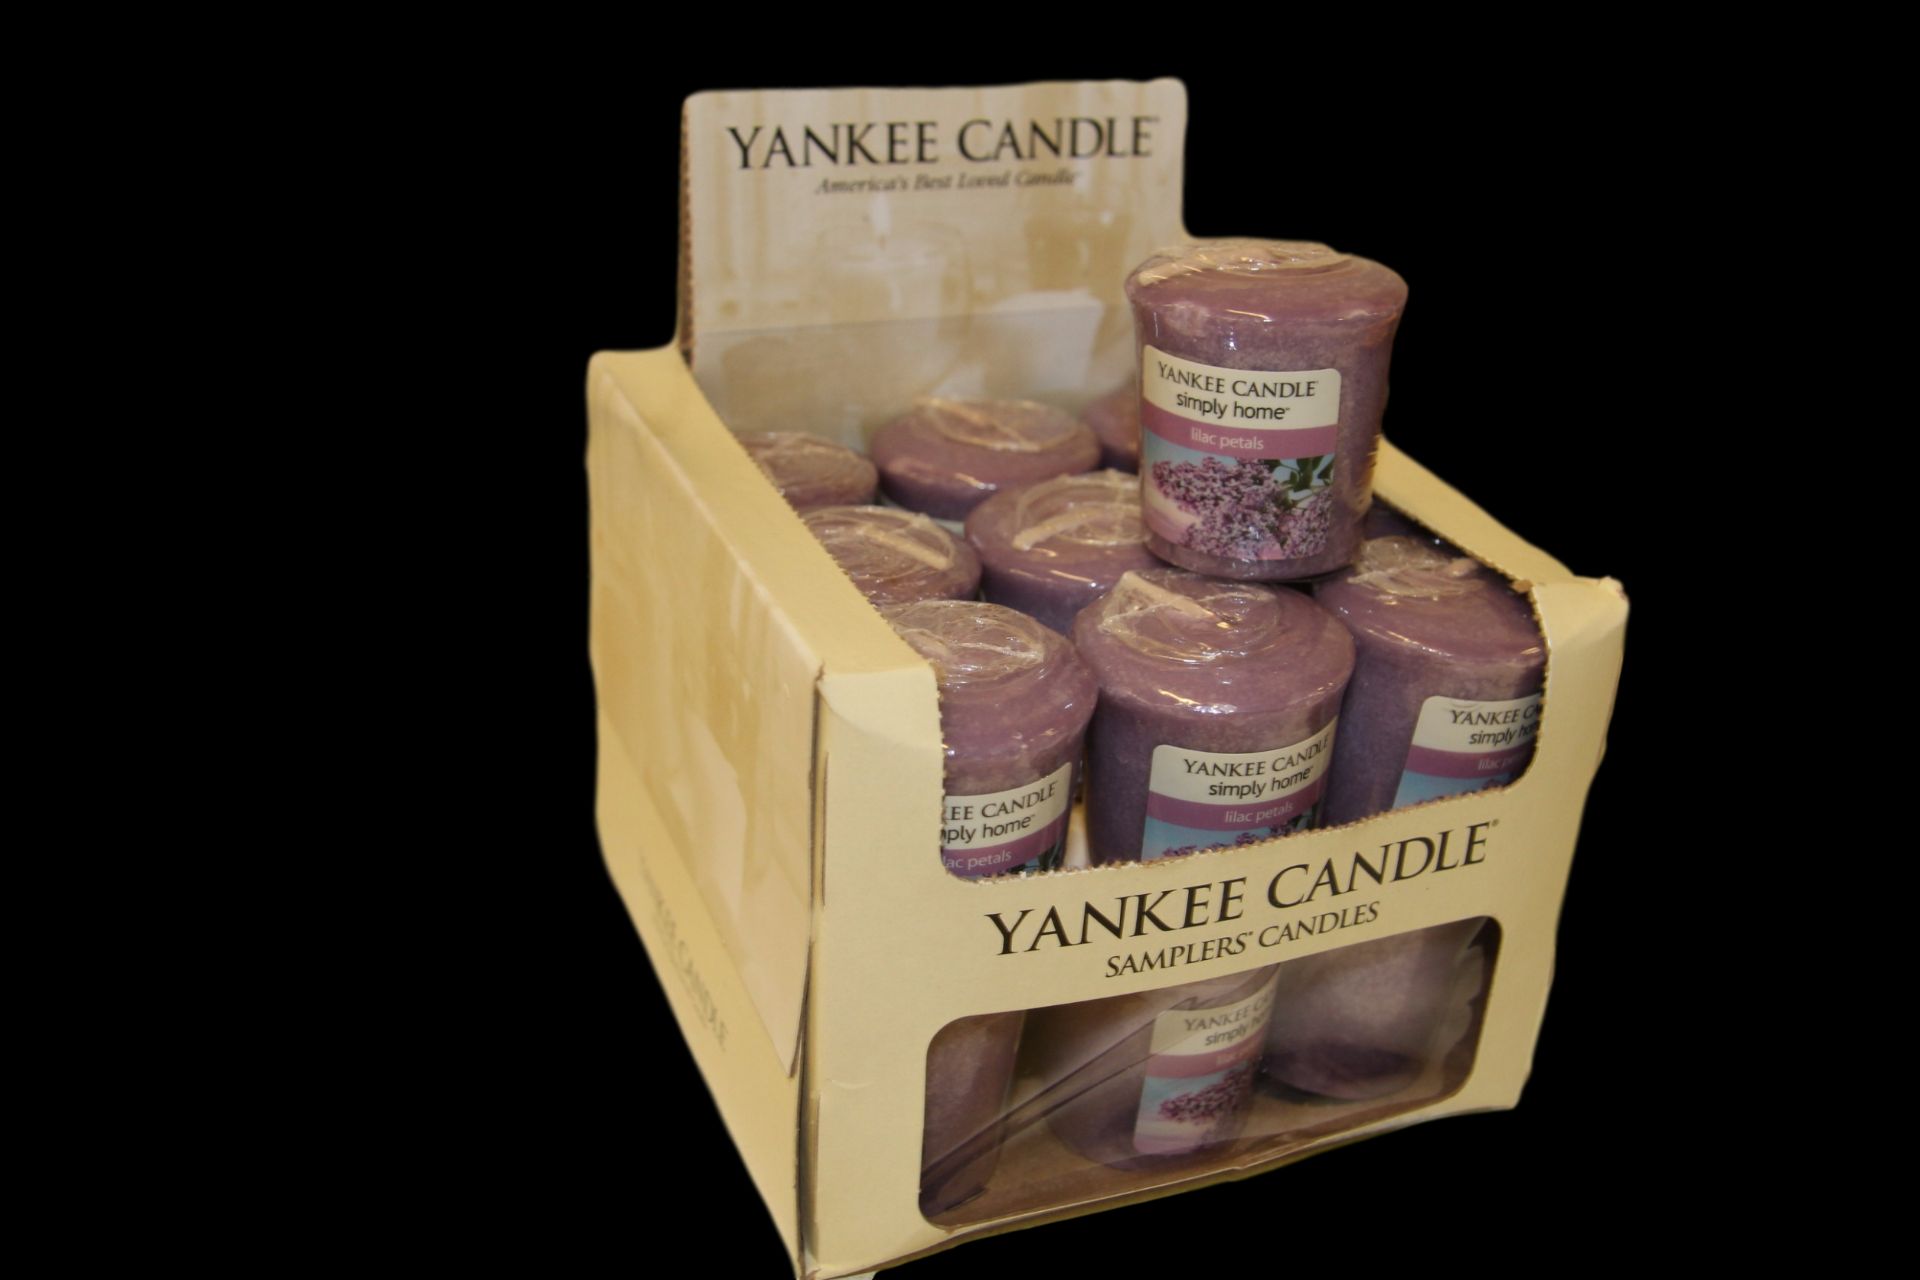 V *TRADE QTY* Brand New 18 x Yankee Candle Votive Lilac Petals 49g X 36 YOUR BID PRICE TO BE